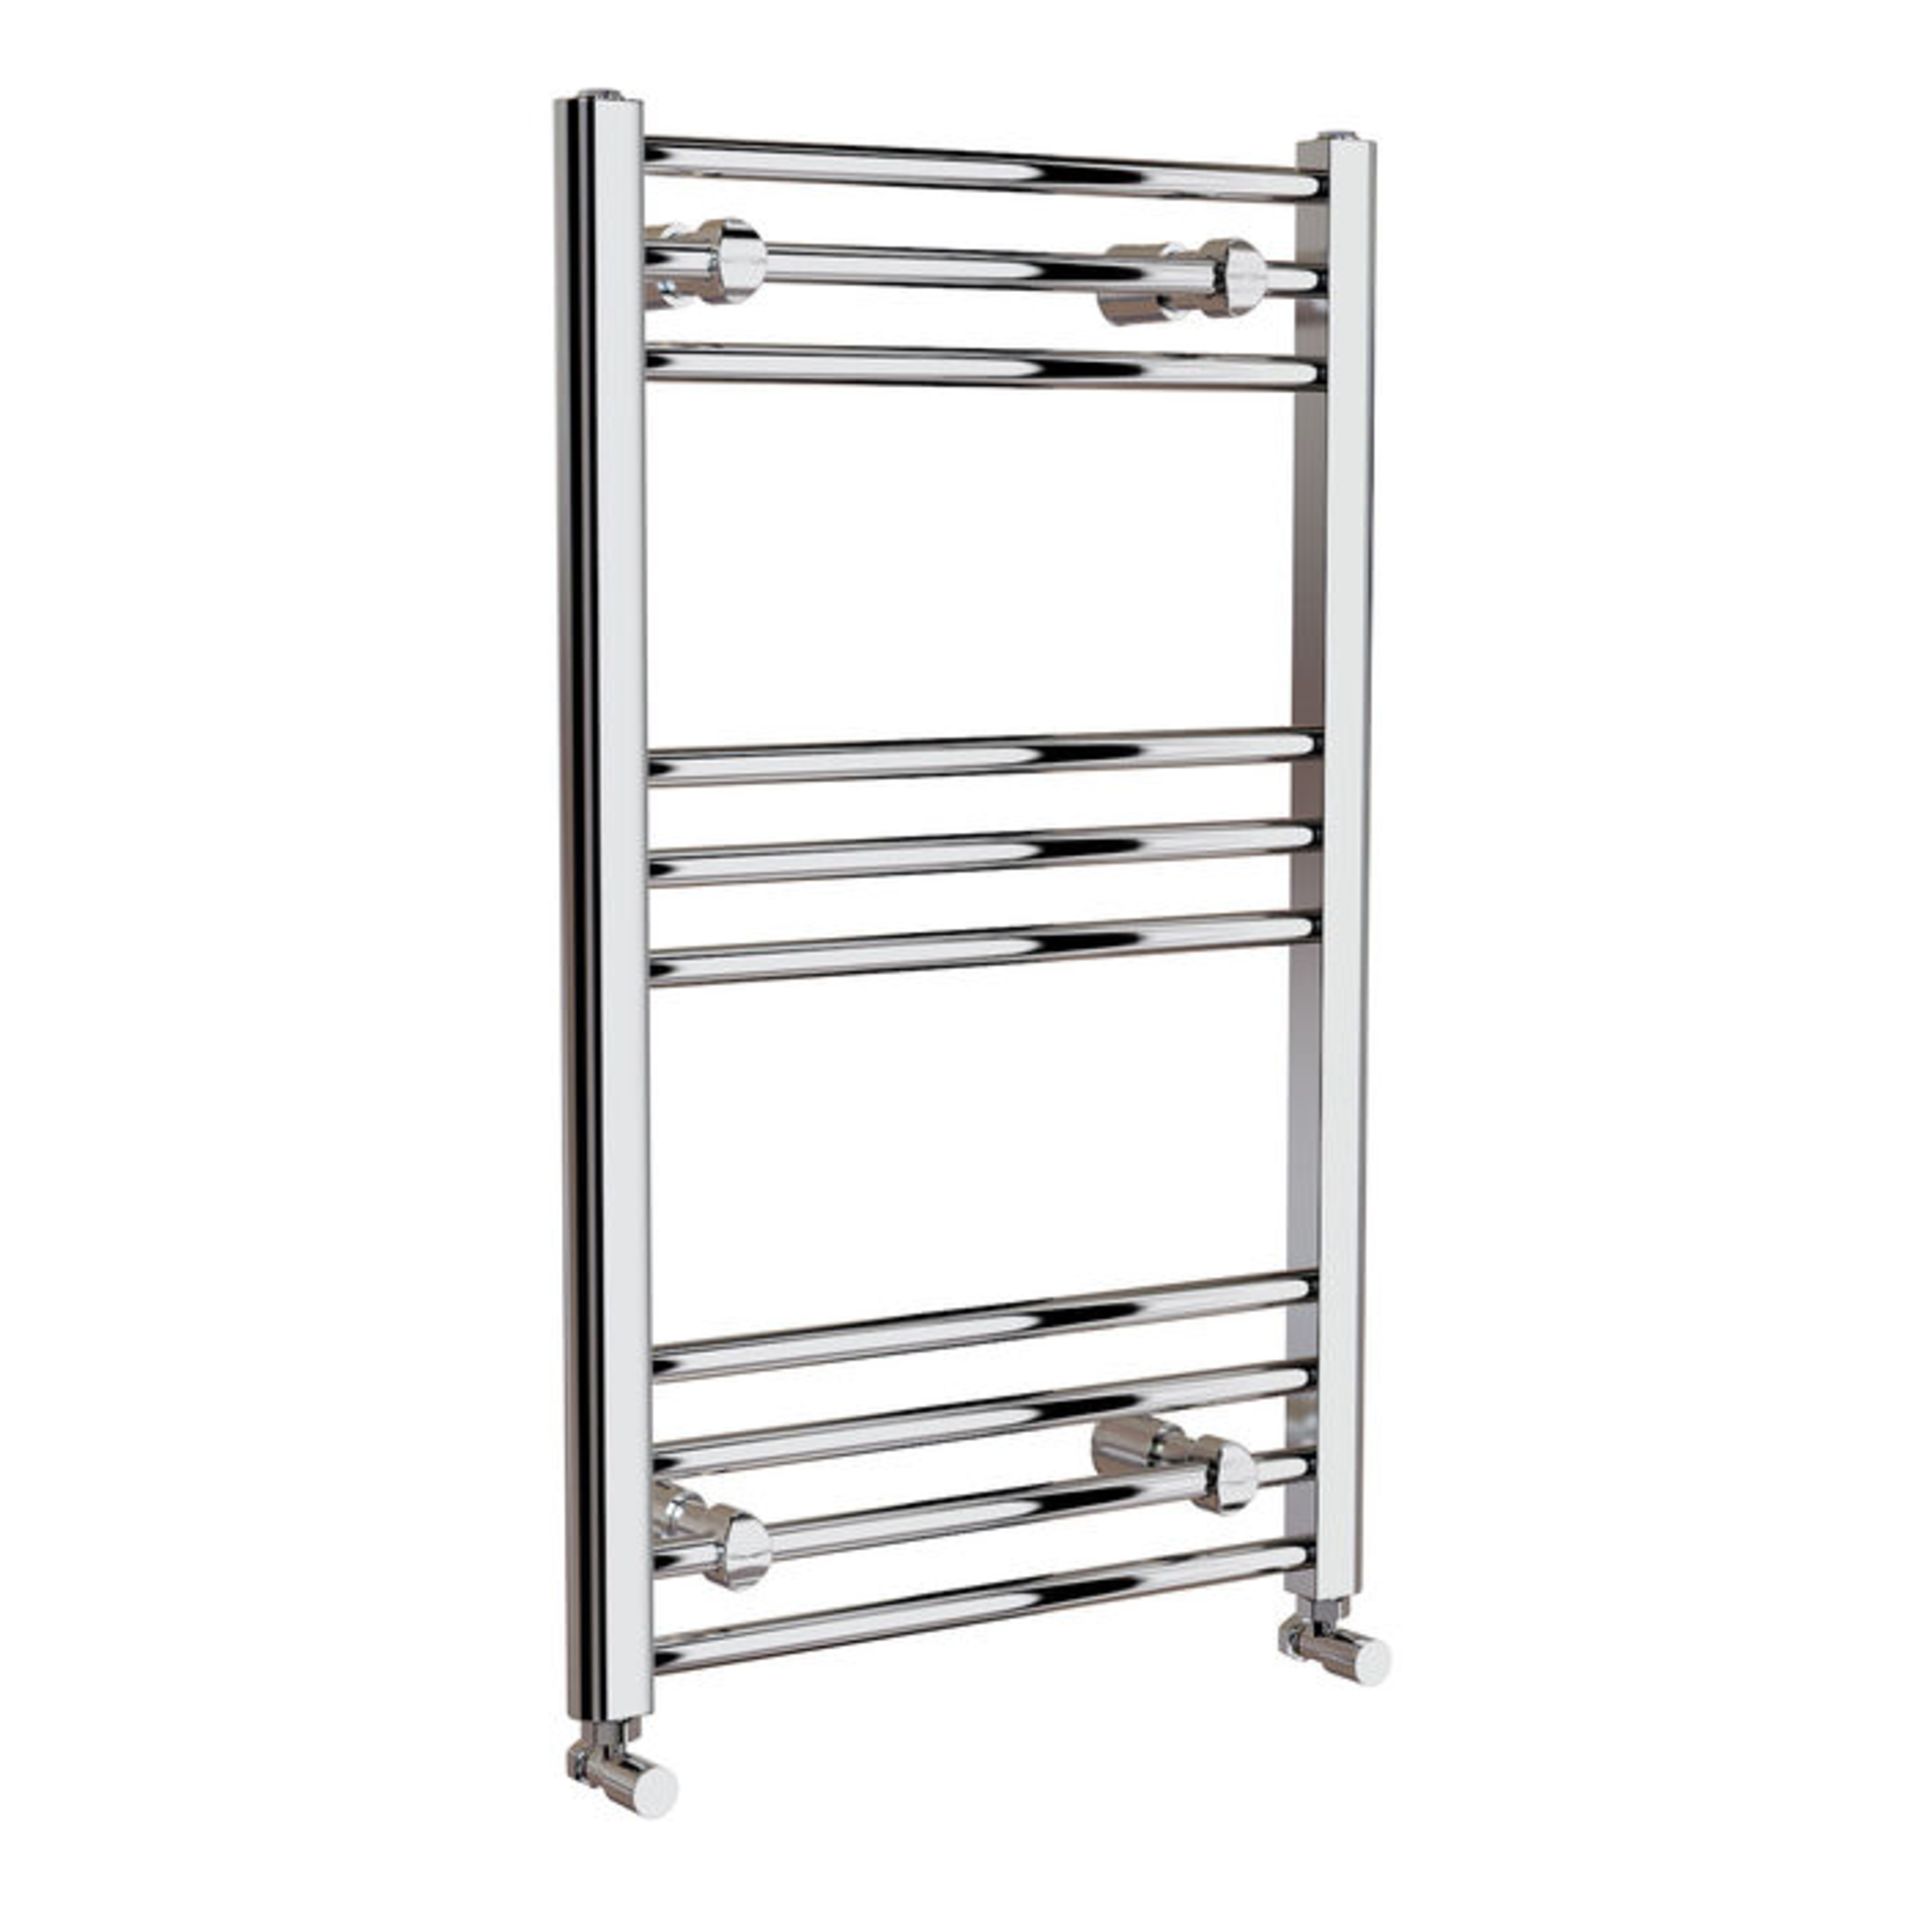 (Z162) 800x500mm Straight Heated Towel Radiator. RRP £99.99. This chrome towel radiator offer... - Image 2 of 2